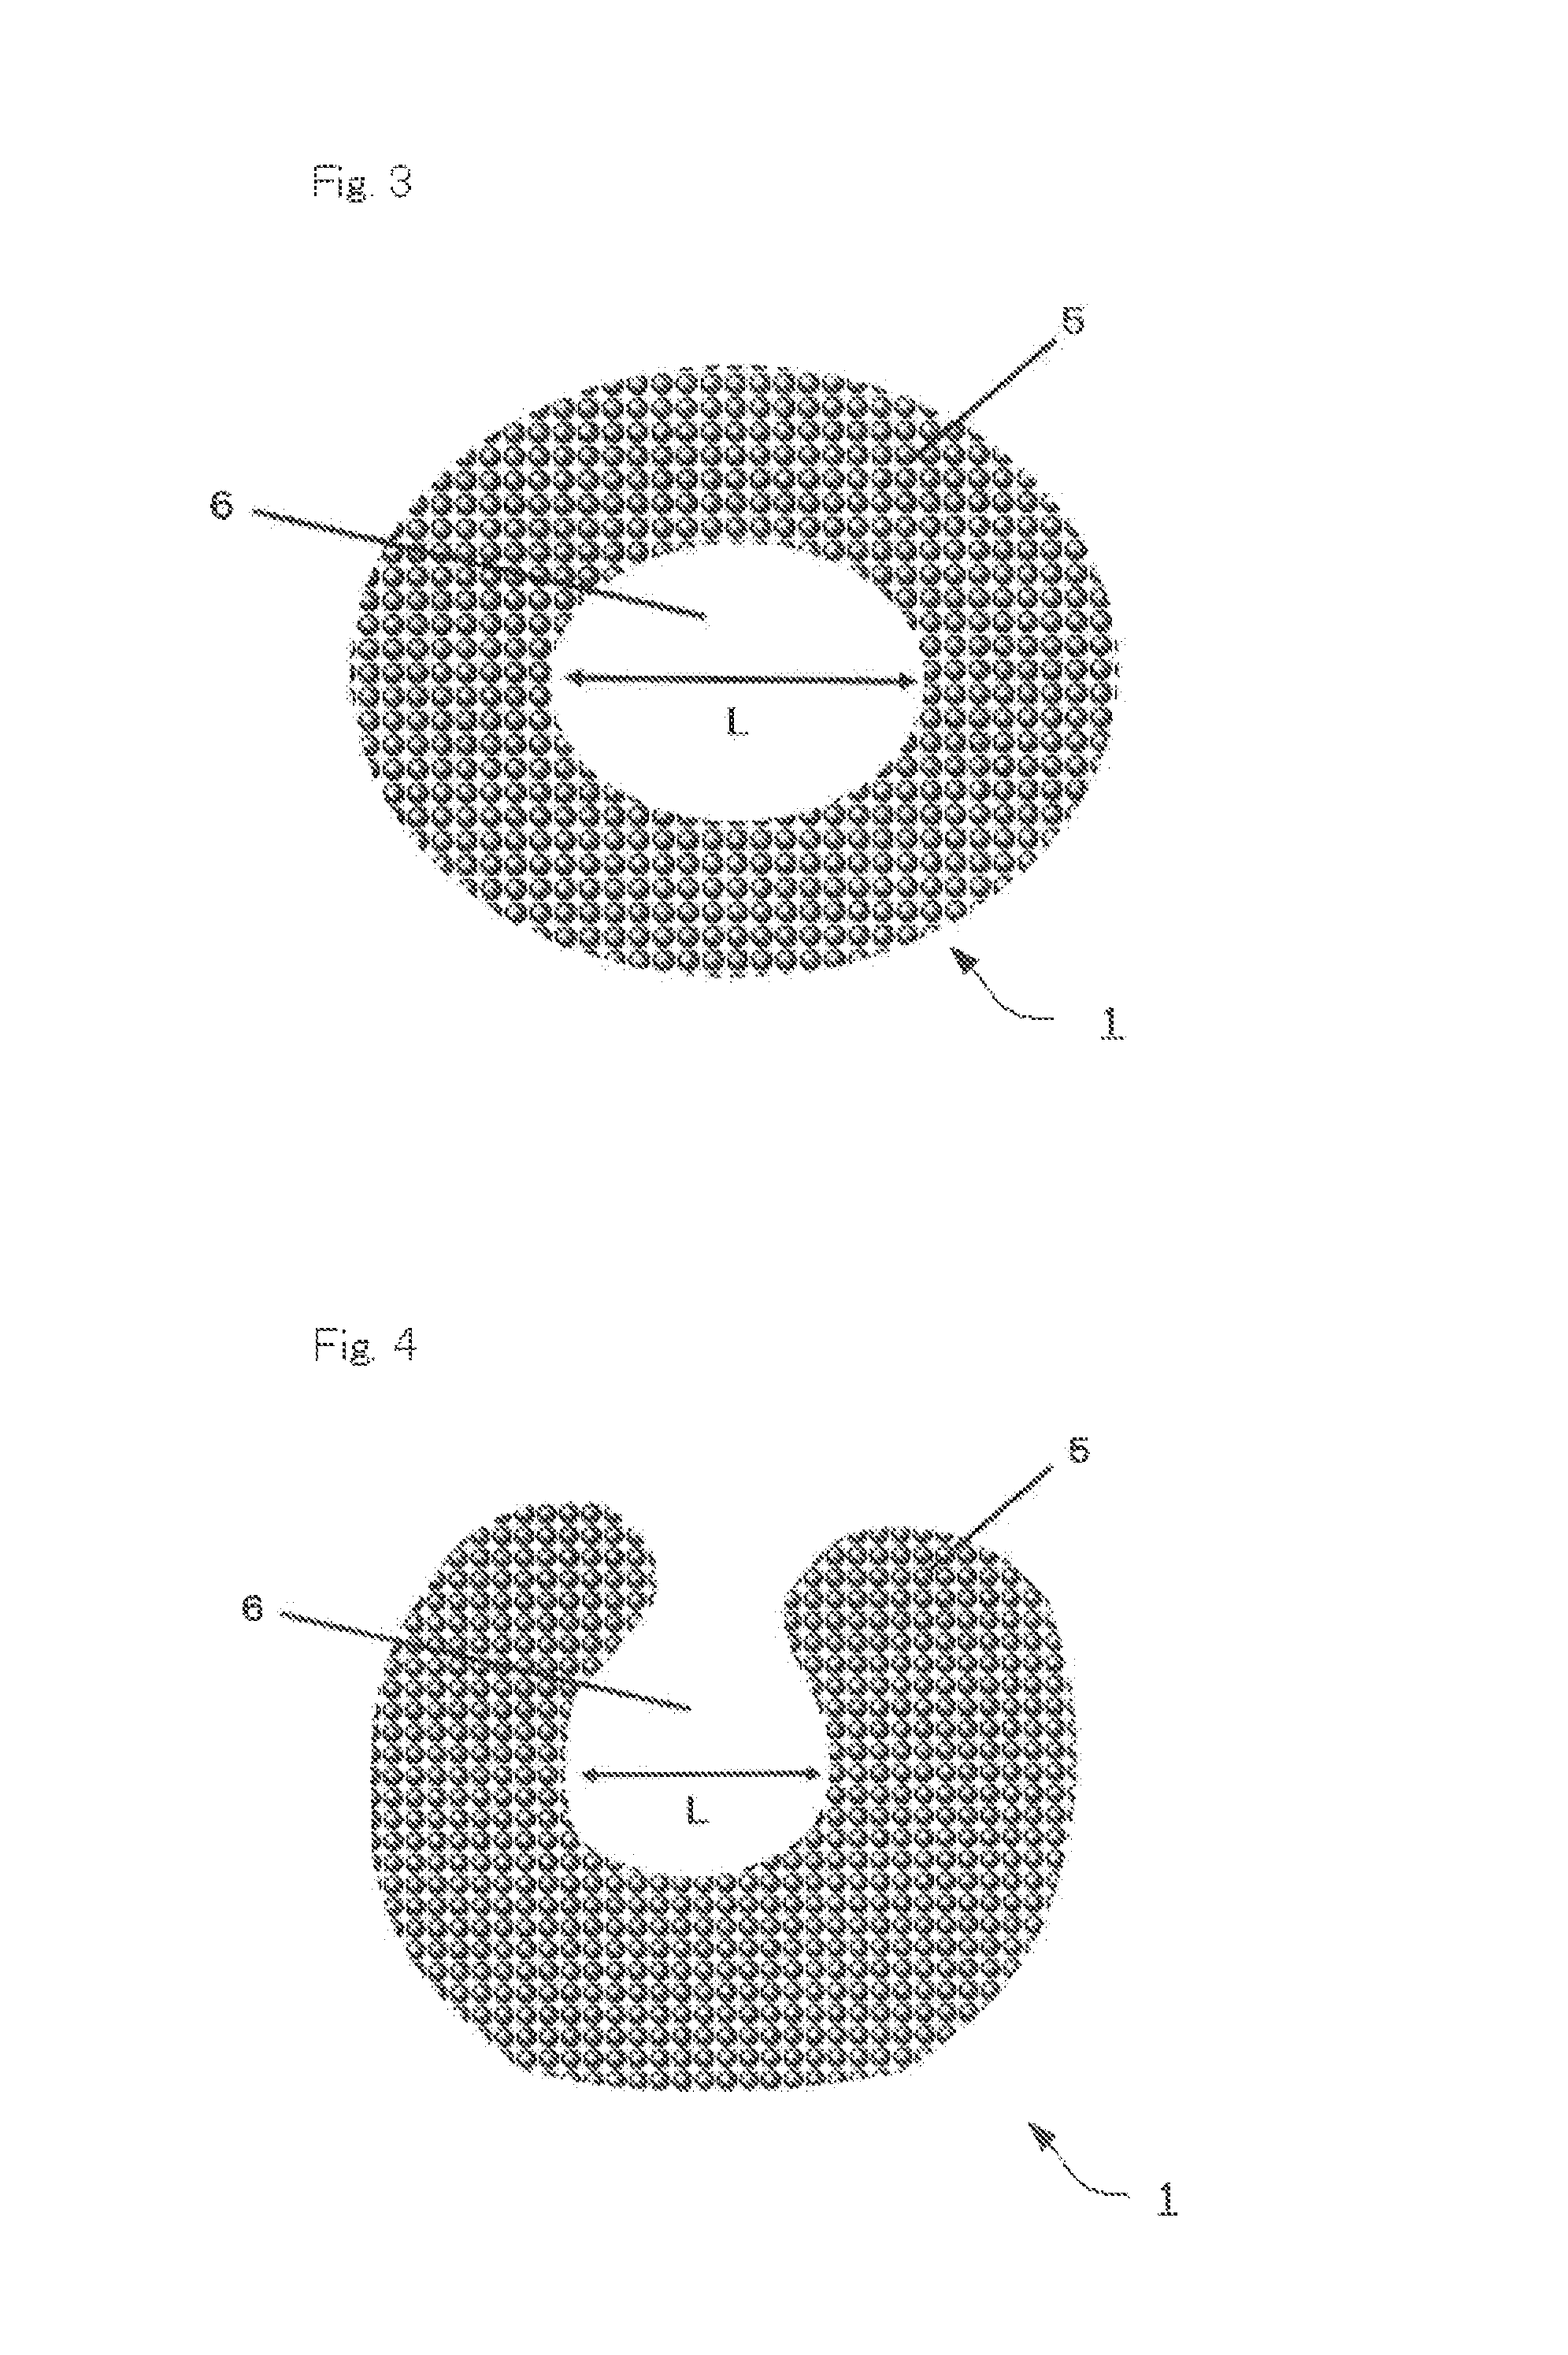 Organic-inorganic composite filler, and method for producing the same